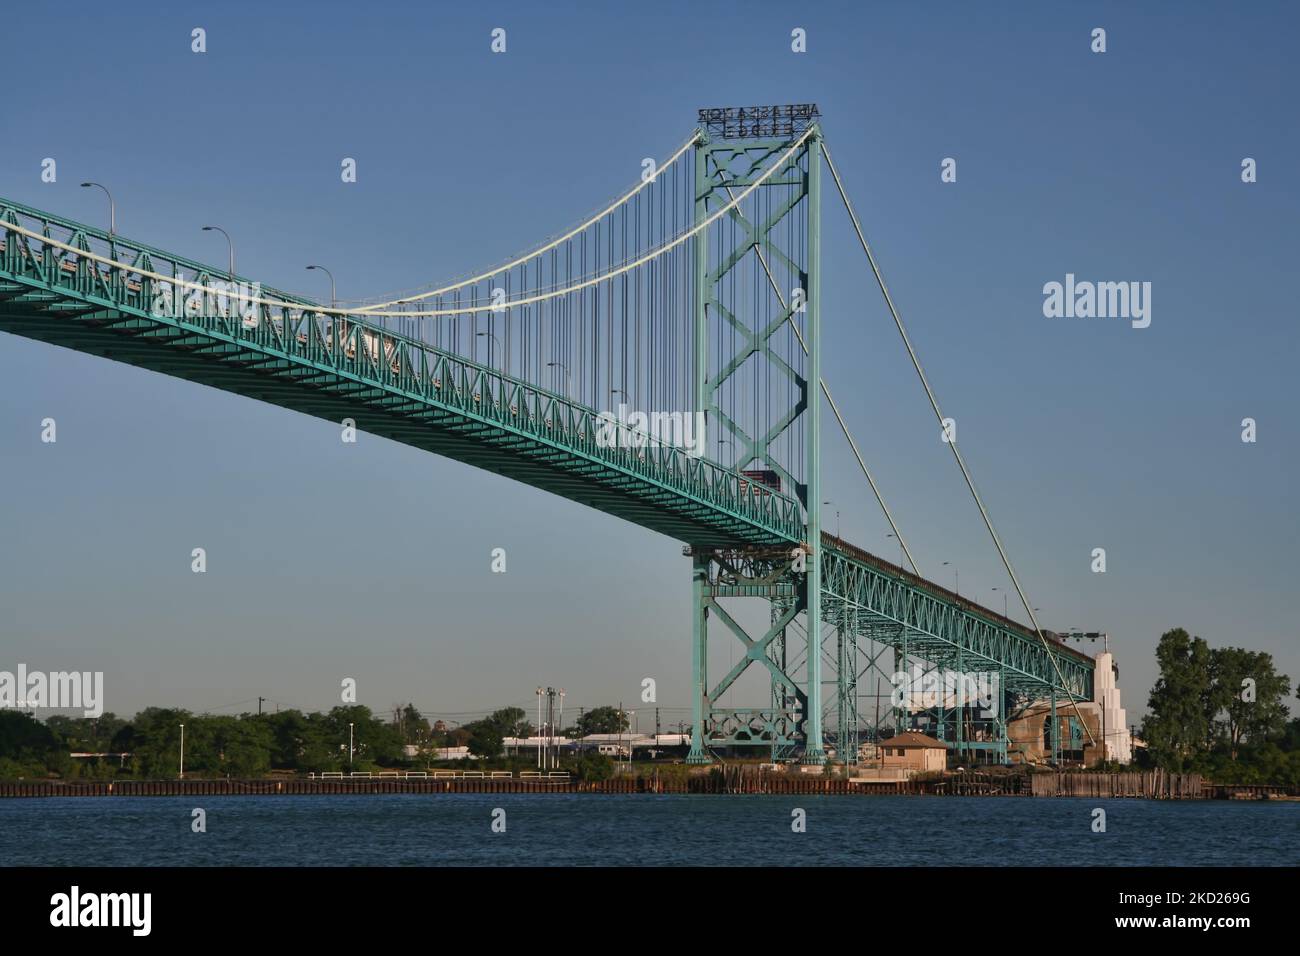 The Ambassador Bridge over the Detroit River between Detroit, Michigan and Windsor, Ontario. Windsor-Detroit is the busiest border crossing, with more than 7,000 trucks crossing daily on average. (Photo by Creative Touch Imaging Ltd./NurPhoto) Stock Photo